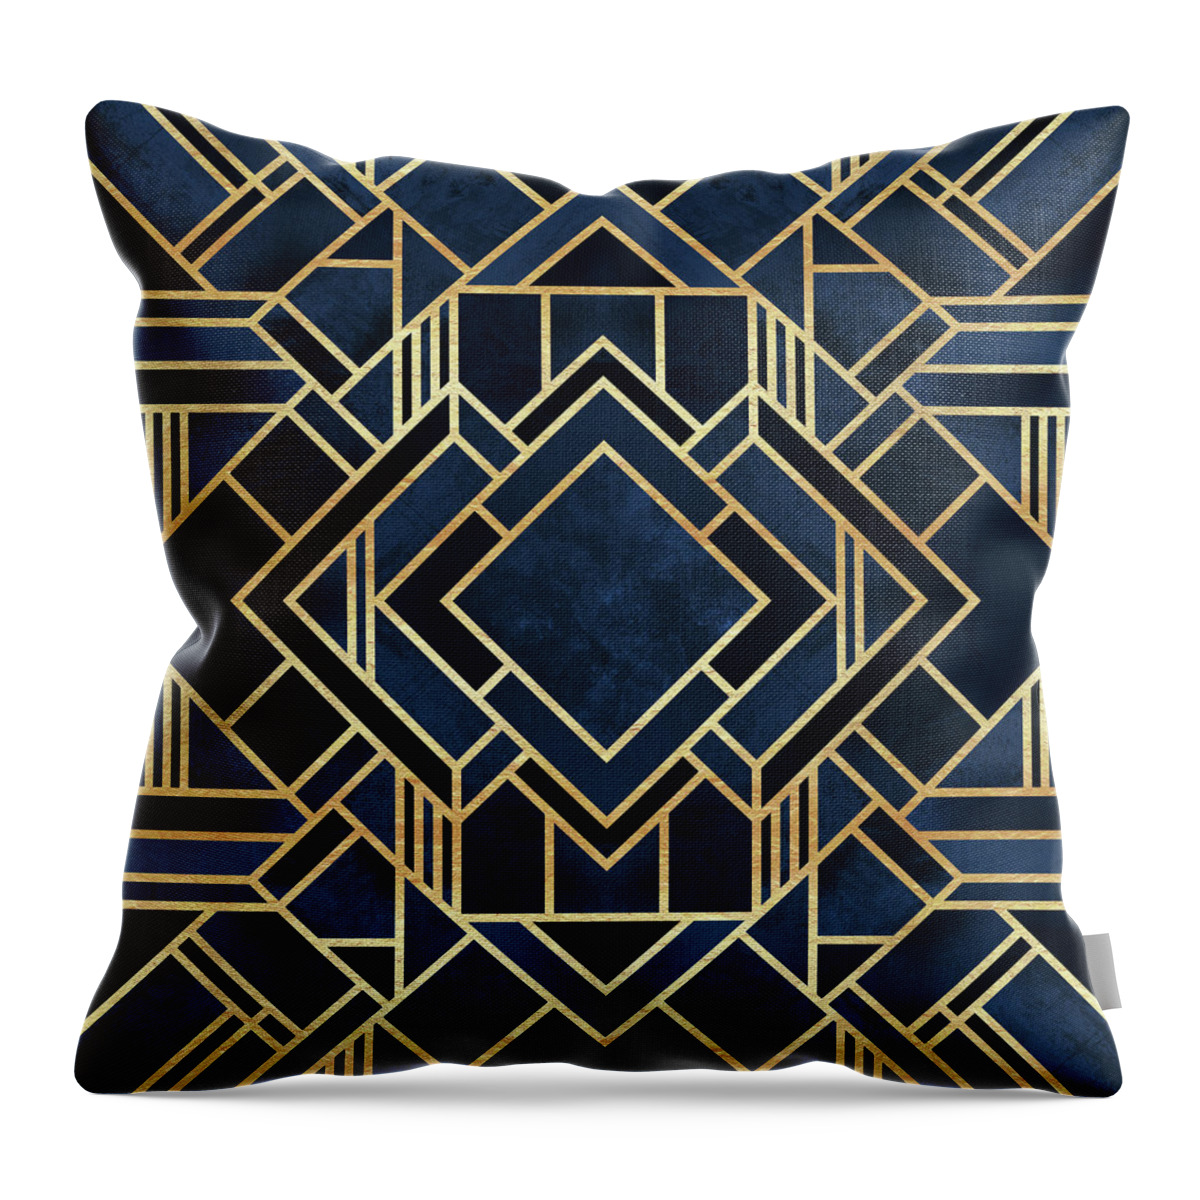 Graphic Throw Pillow featuring the digital art Art Deco Blue by Elisabeth Fredriksson